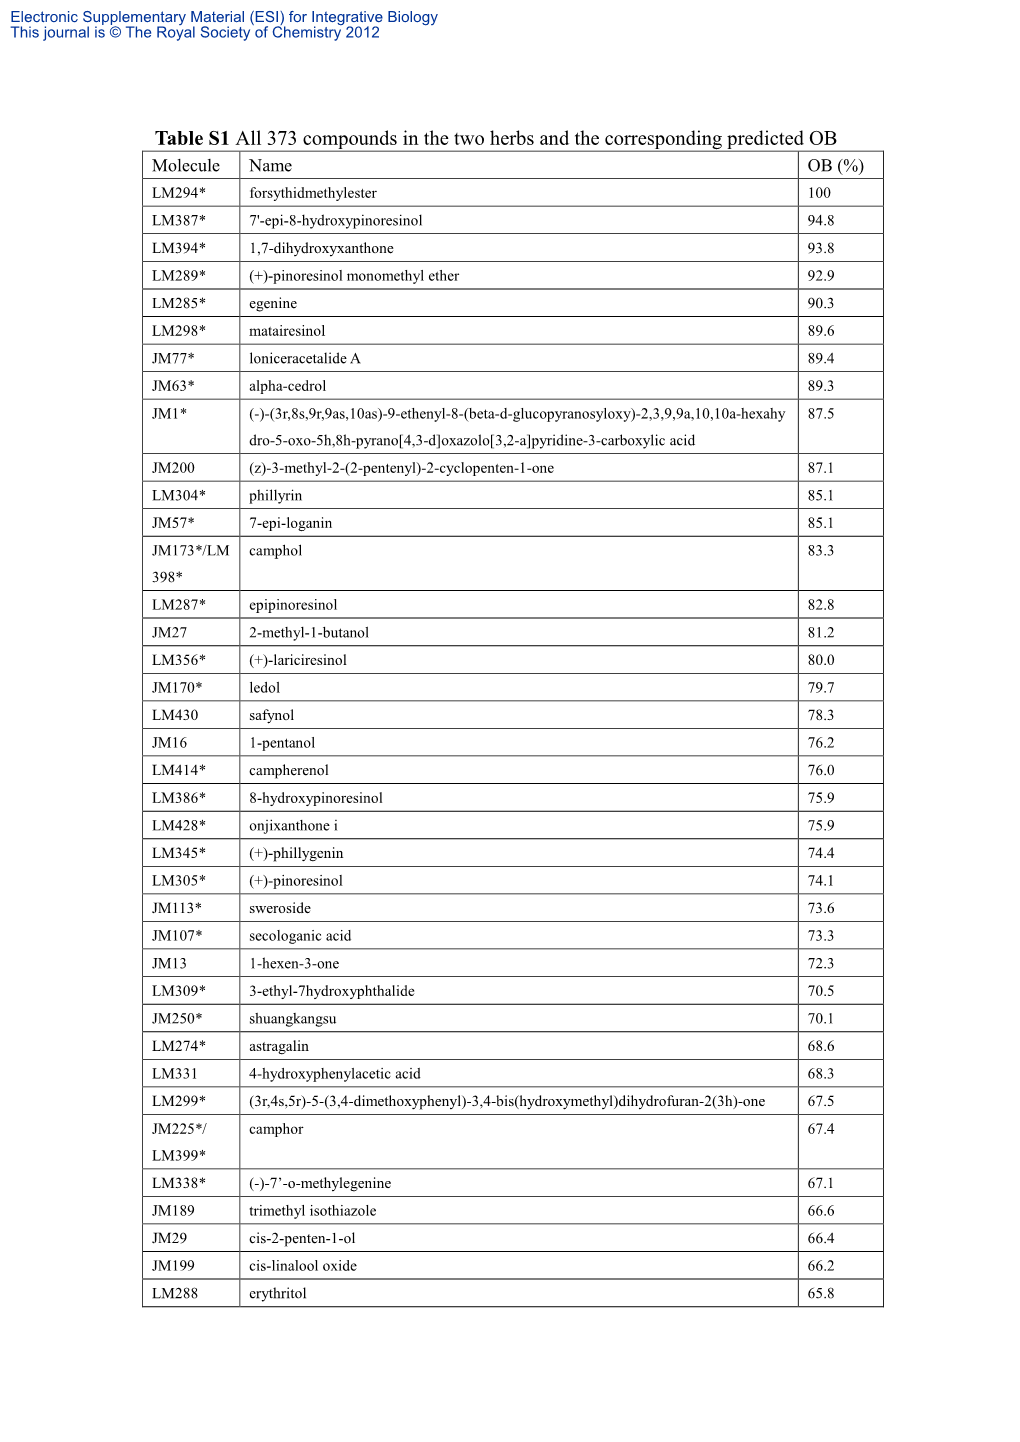 Table S1 All 373 Compounds in the Two Herbs and the Corresponding